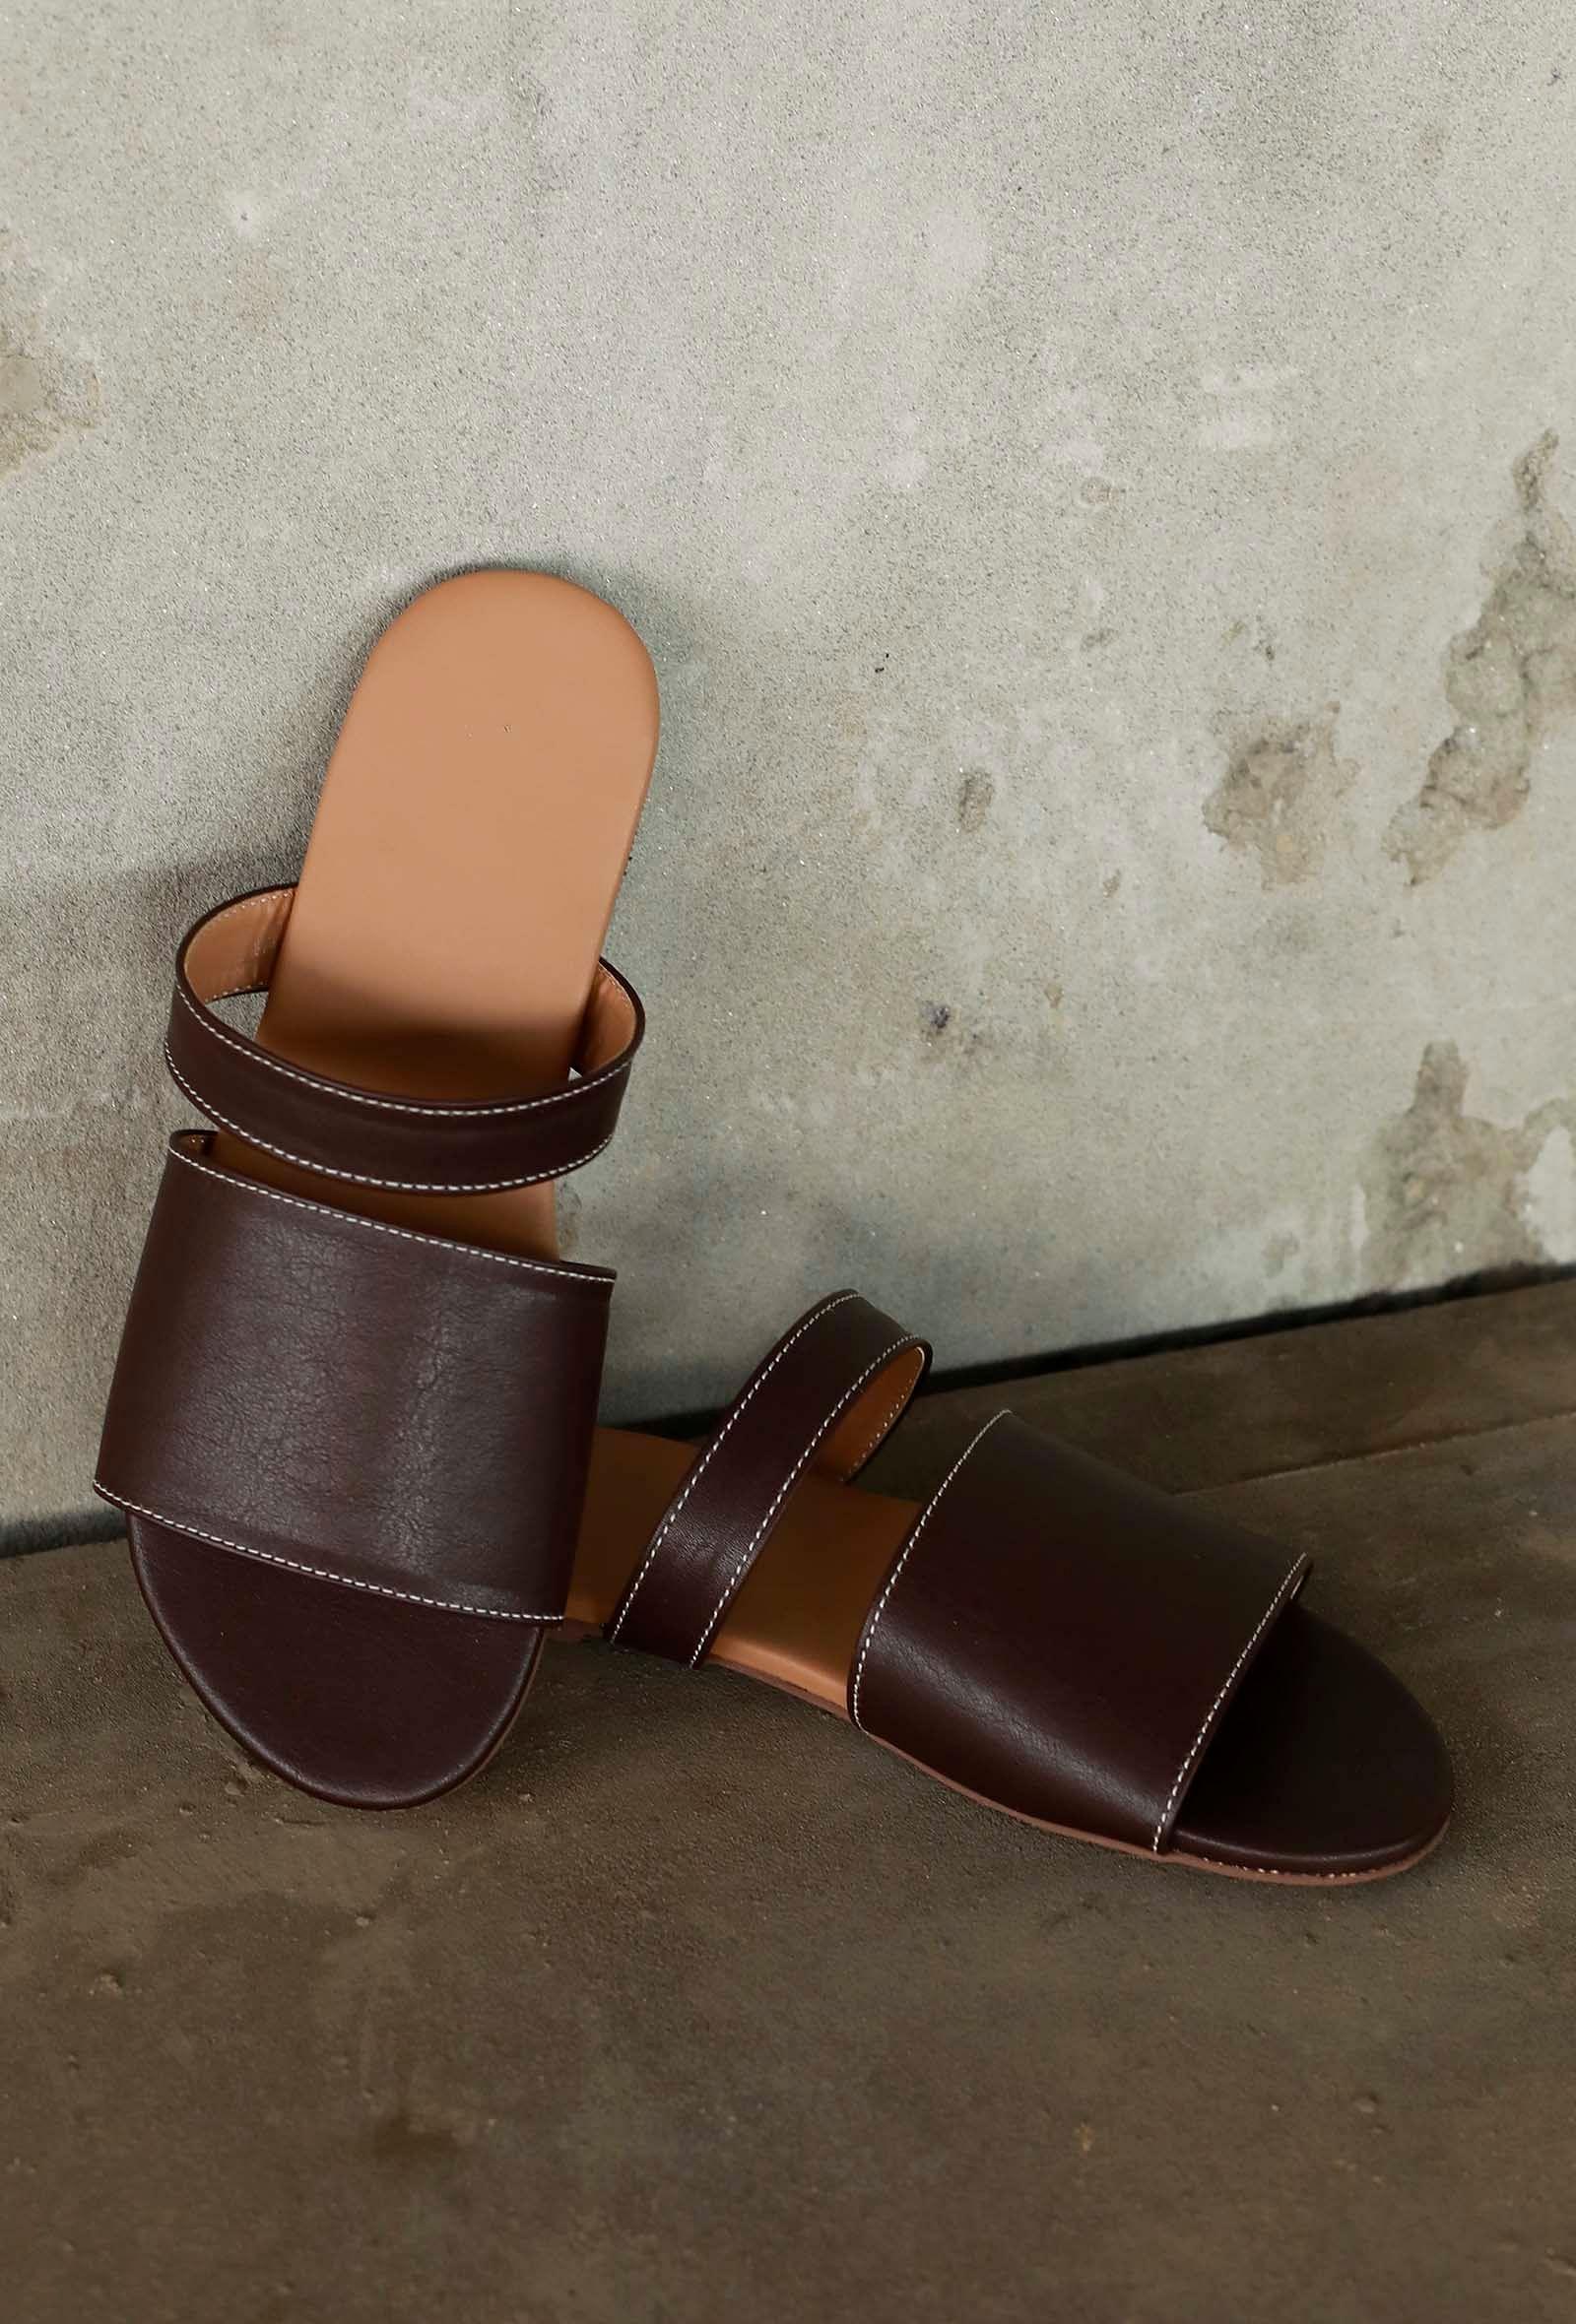 tortilla brown cruelty free leather sliders